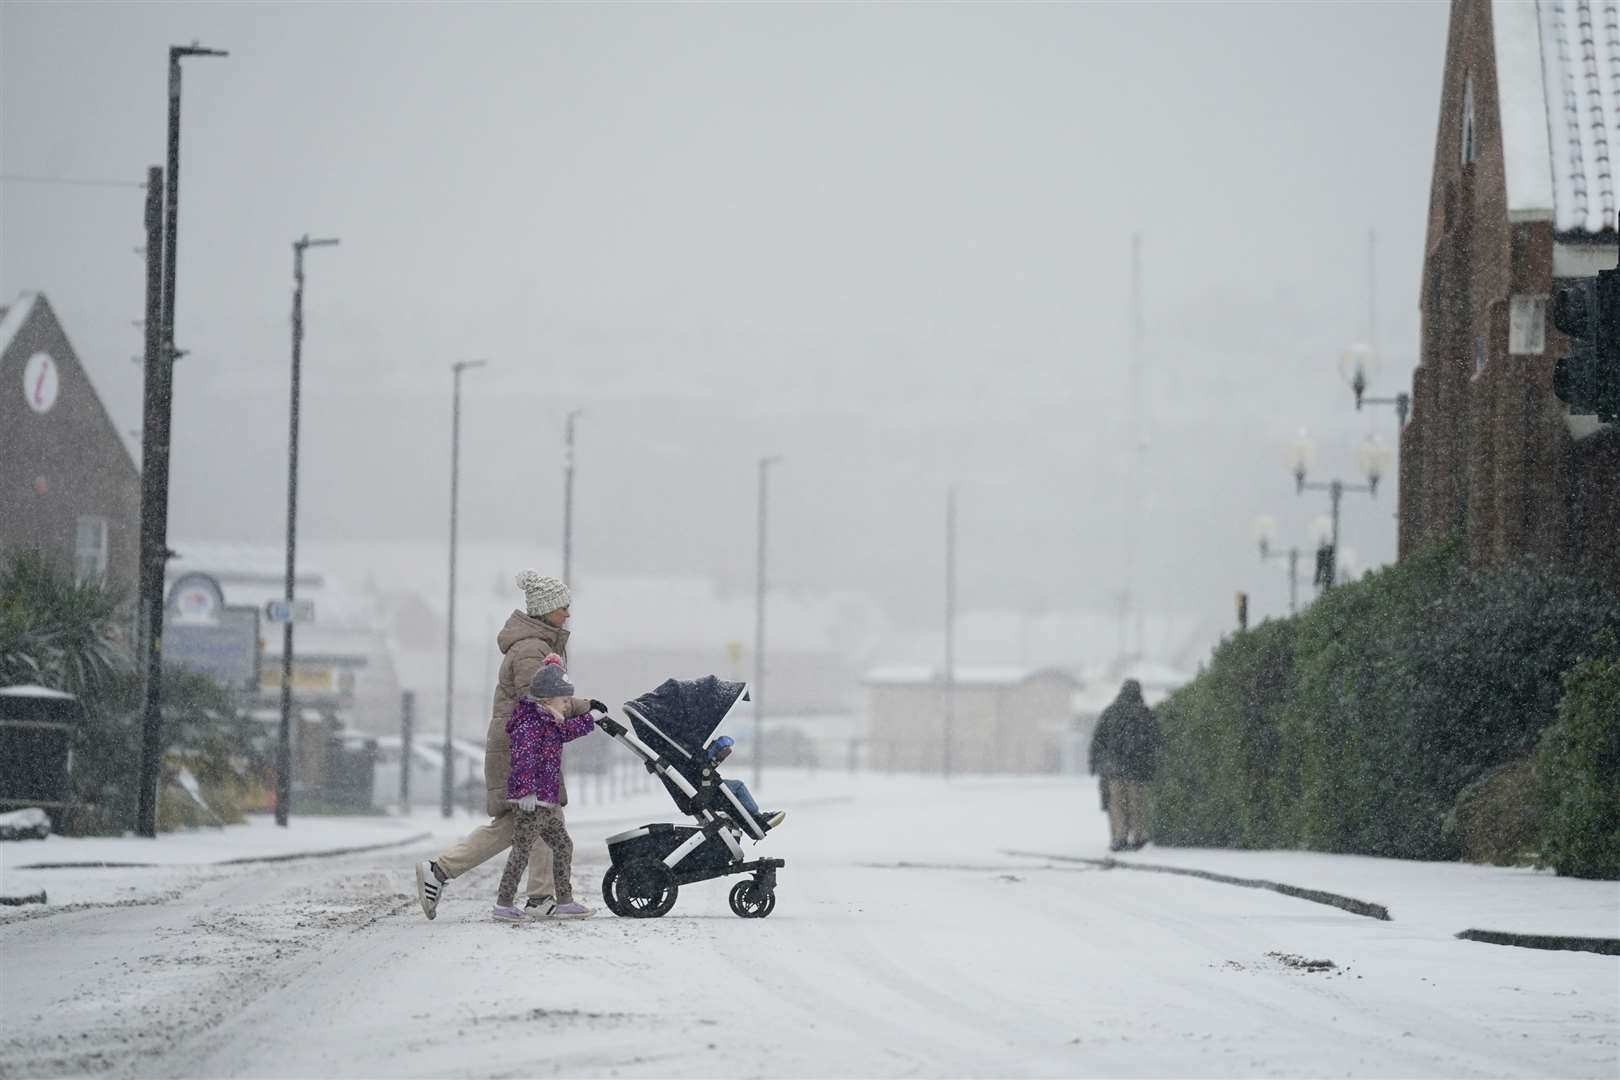 People make their way through snow in Whitby (Danny Lawson/PA